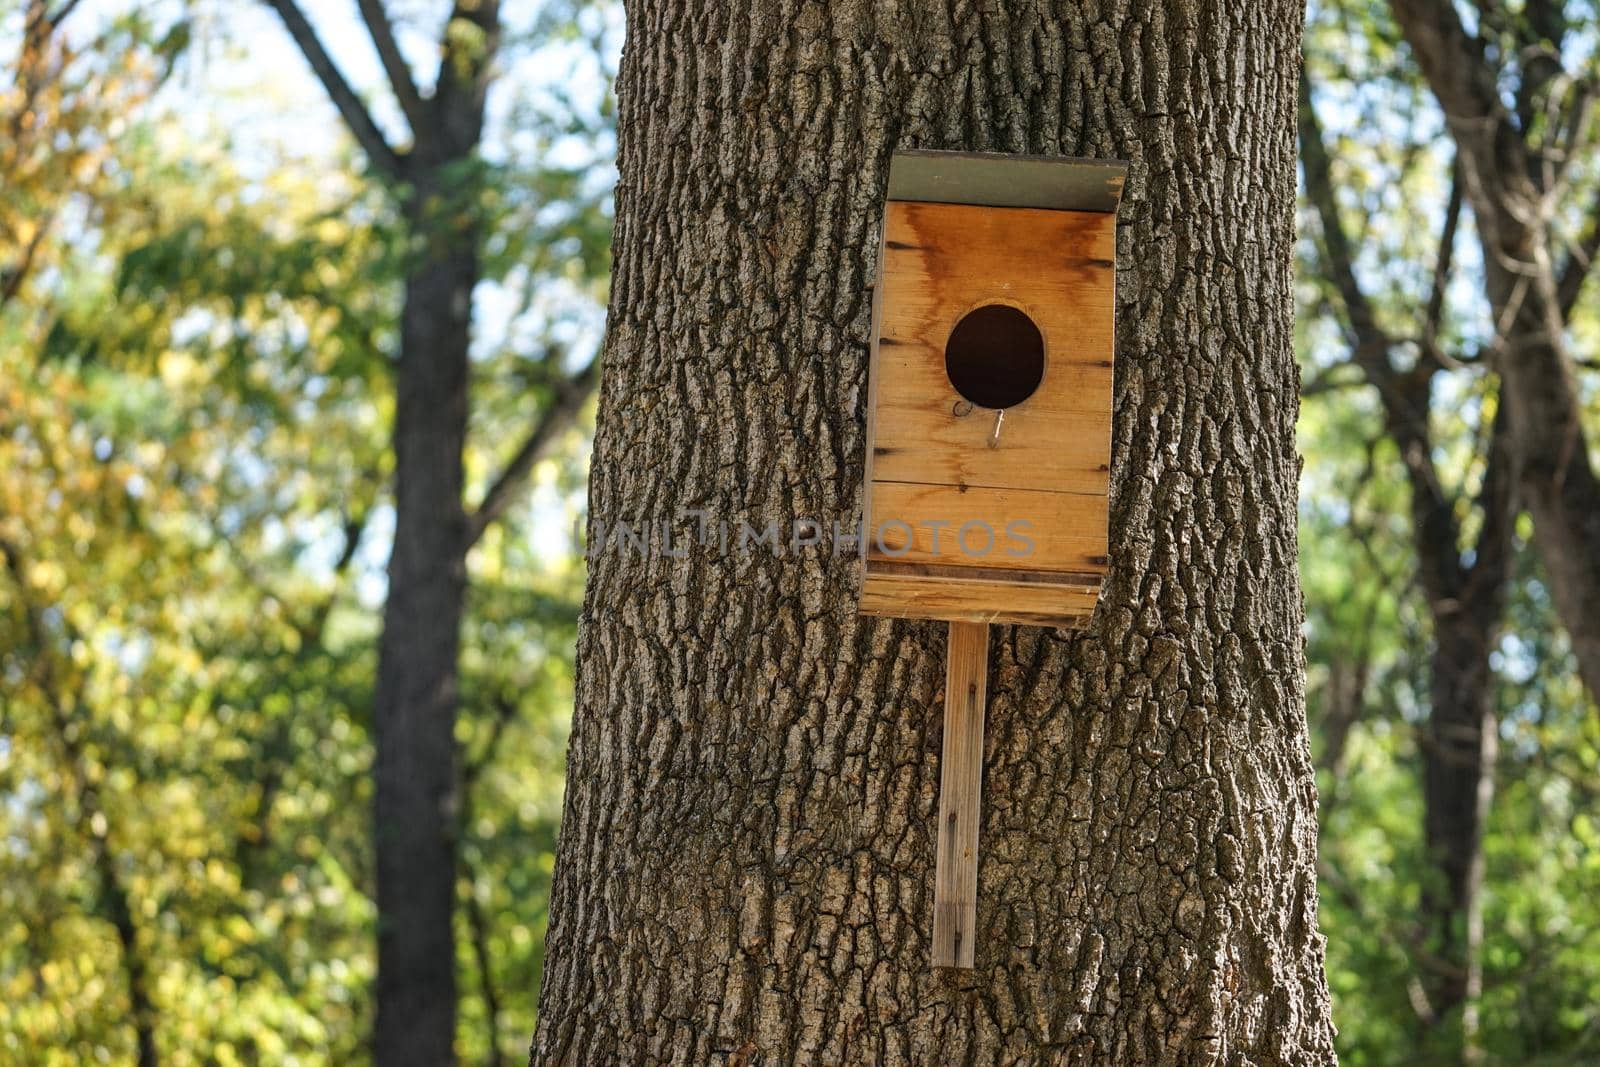 A birdhouse made of plywood on a thick tree trunk and natural background in Sunny day.